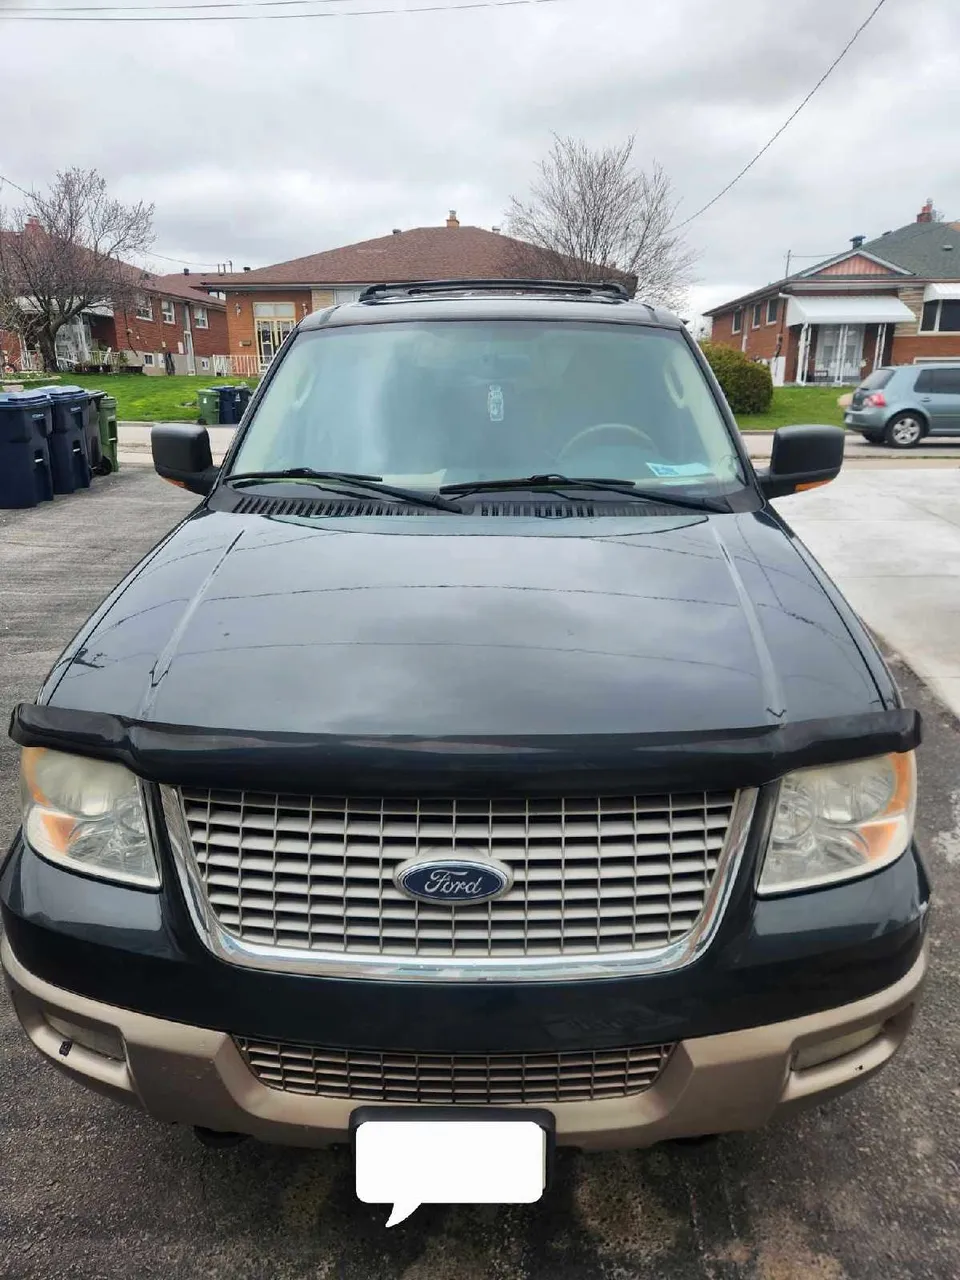 2004 Ford Expedition V8 5.4L